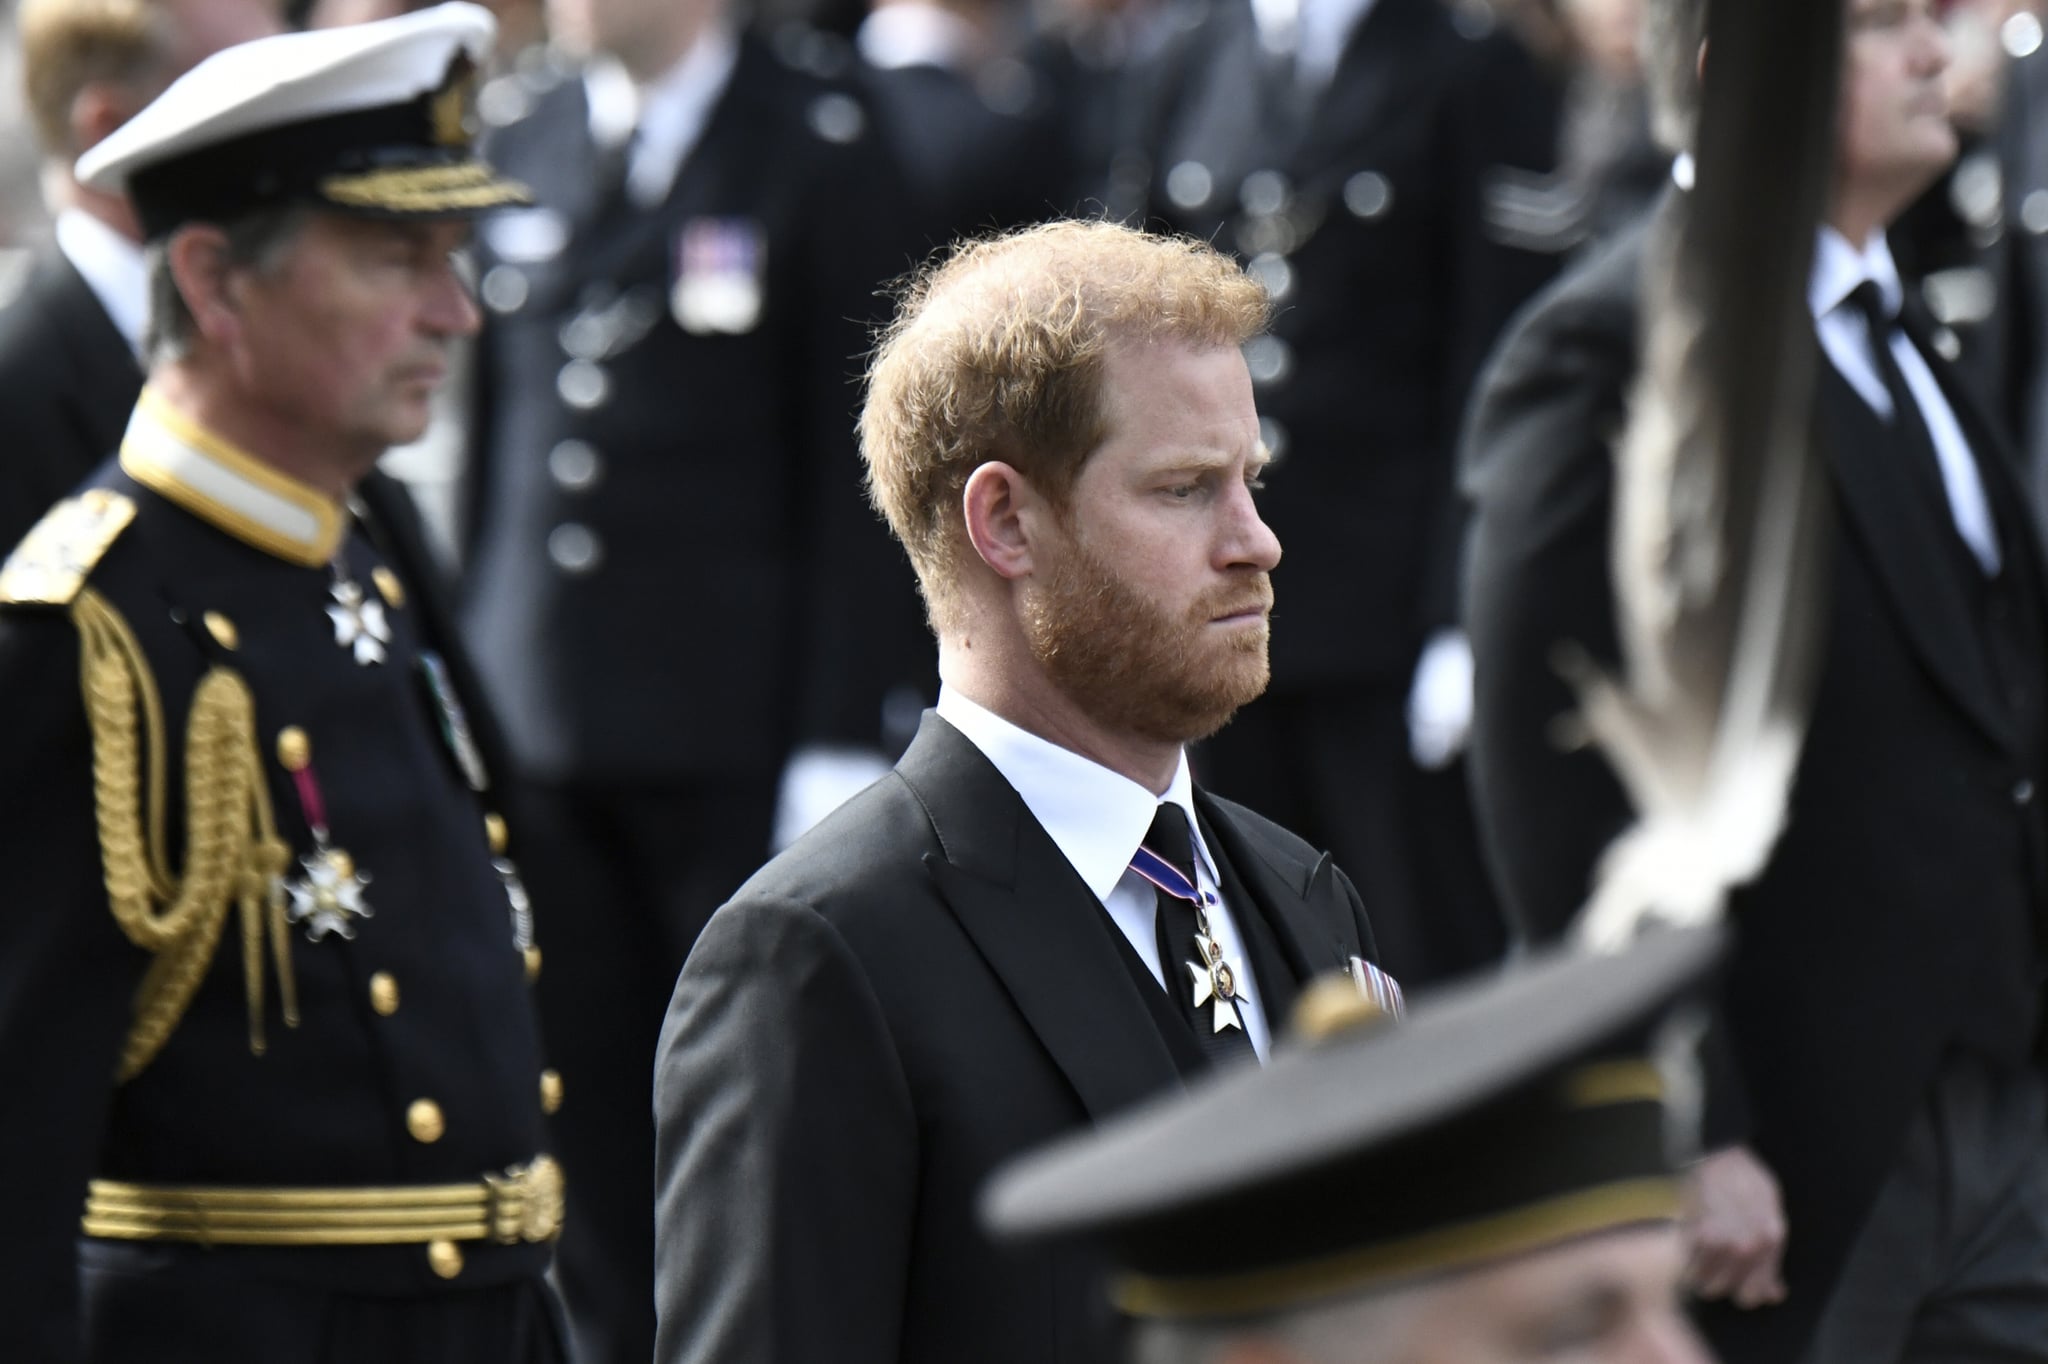 LONDON, ENGLAND - SEPTEMBER 19: Prince Harry, Duke of Sussex follows the coffin of Queen Elizabeth II, as it travels from Westminster Abbey to Wellington Arch, on September 19, 2022 in London, England. (Photo by Stephane de Sakutin - WPA Pool/Getty Images)